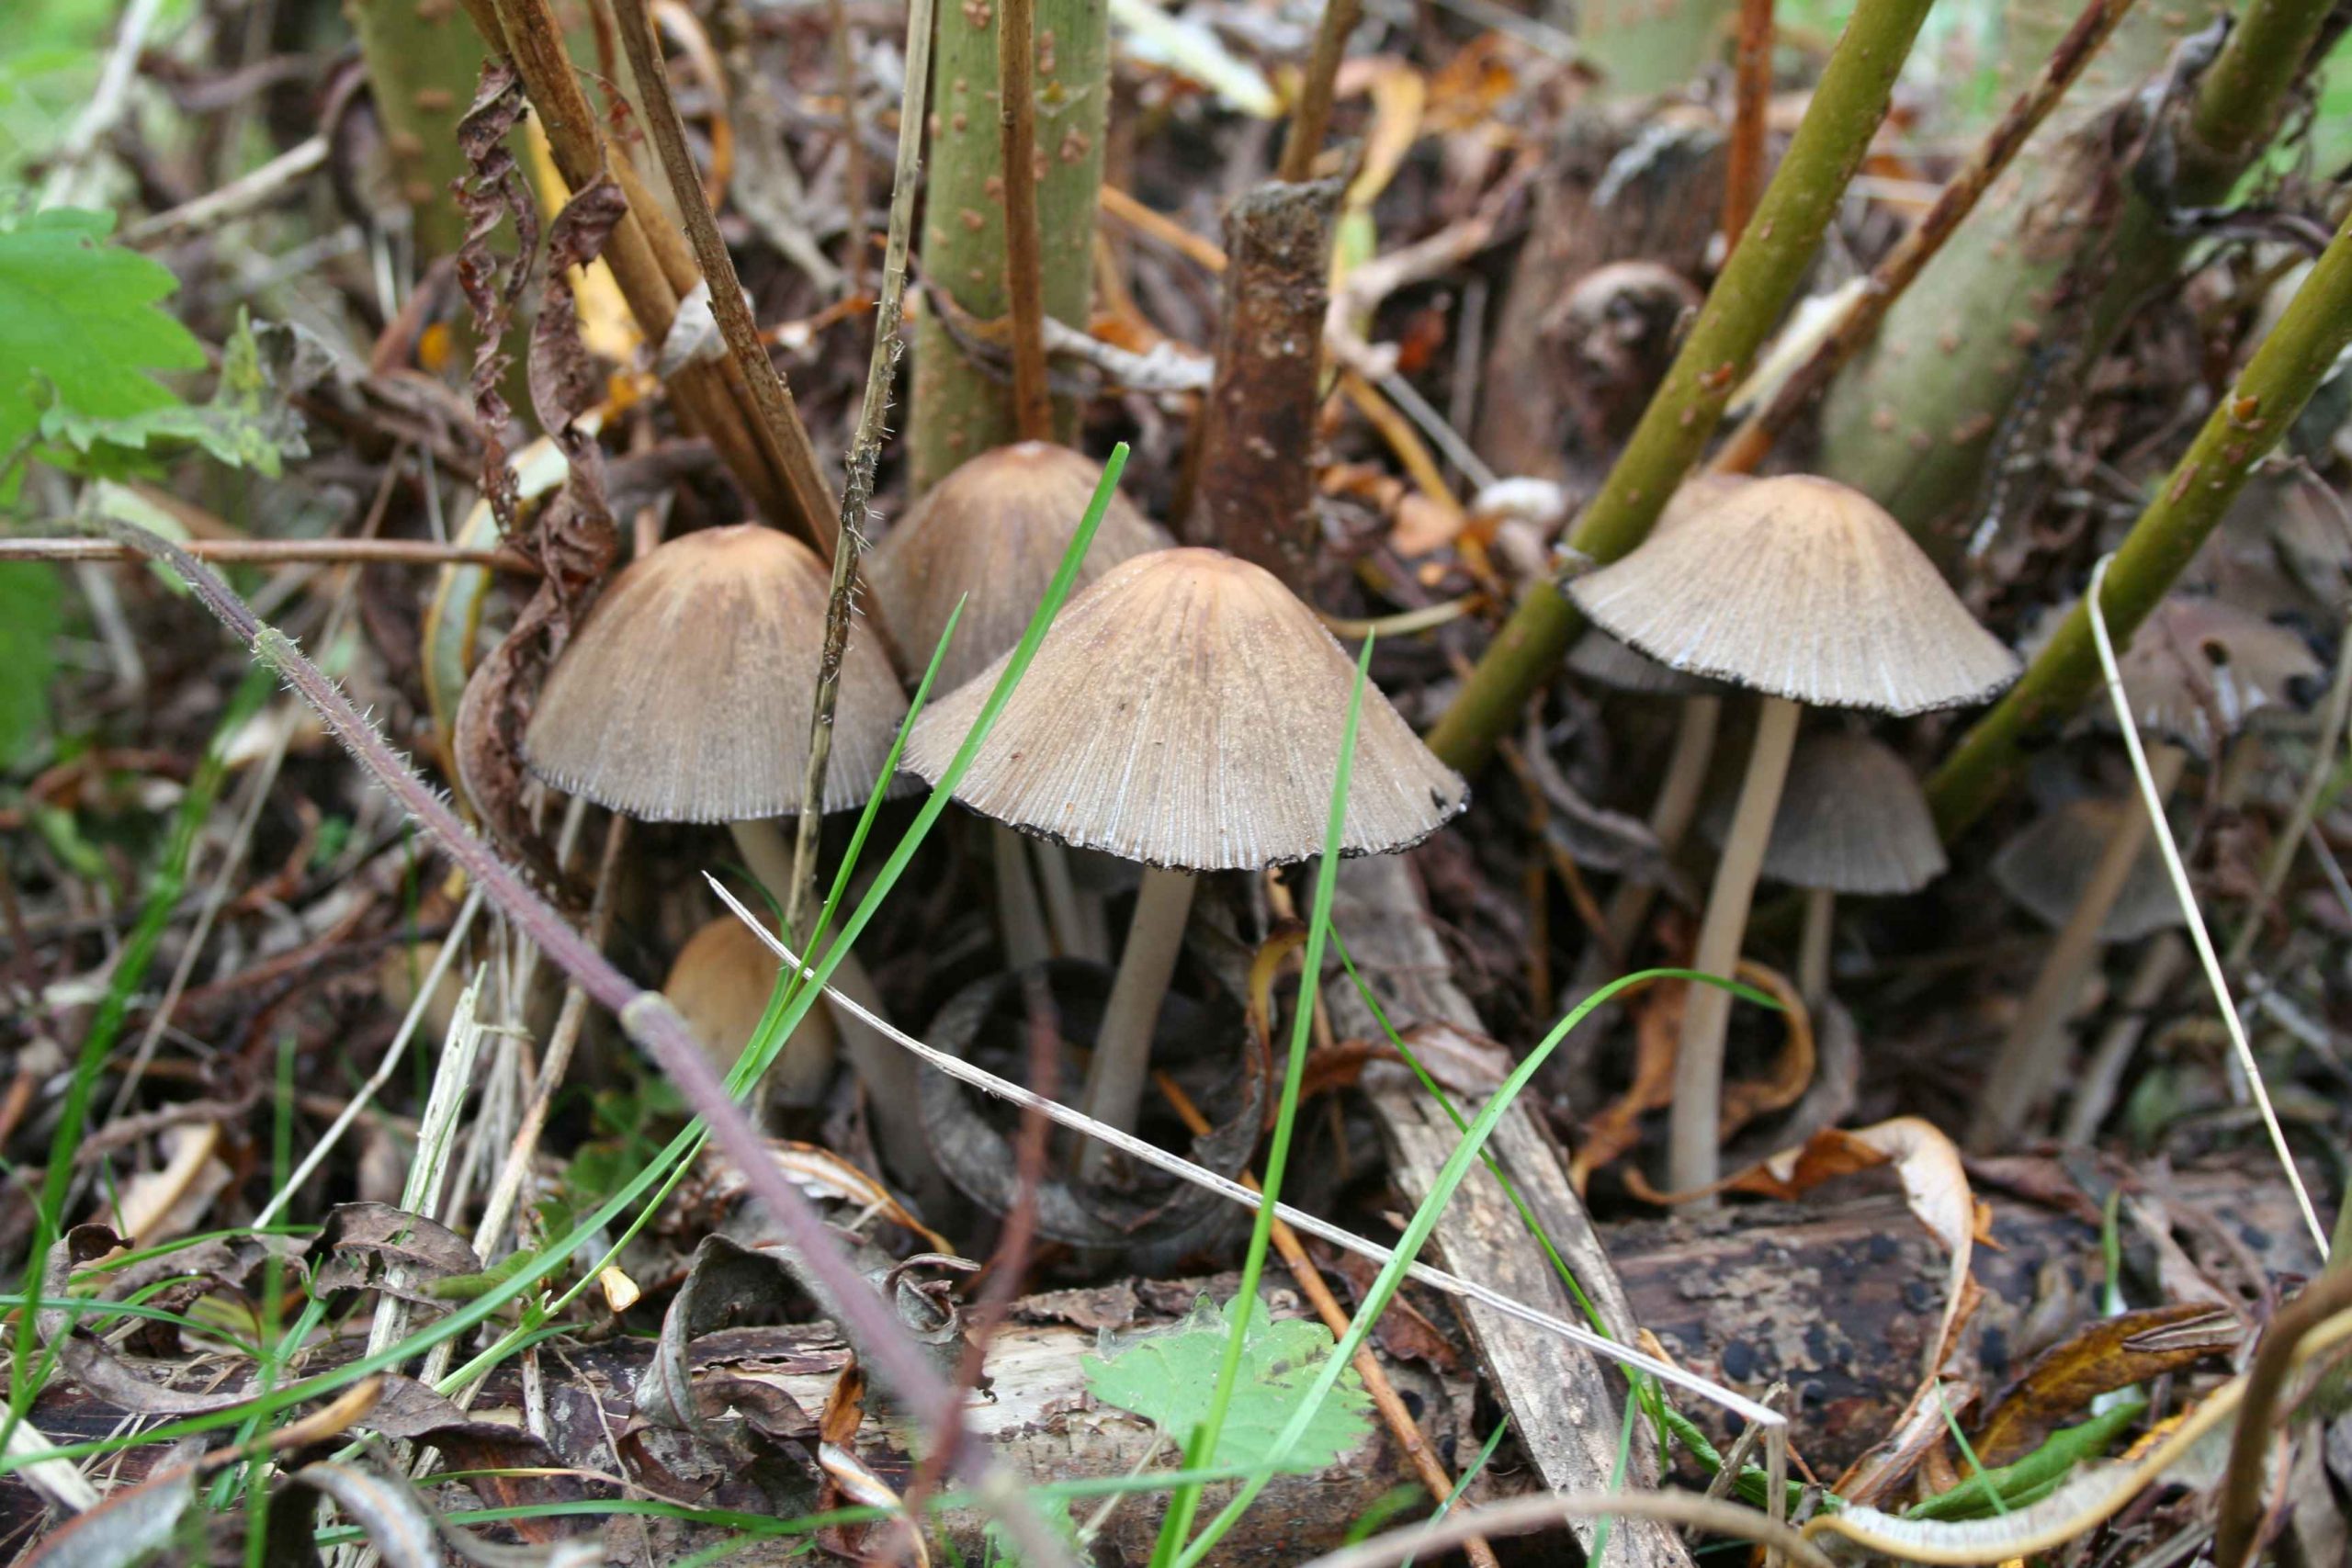 Fungi growing on willow coppice